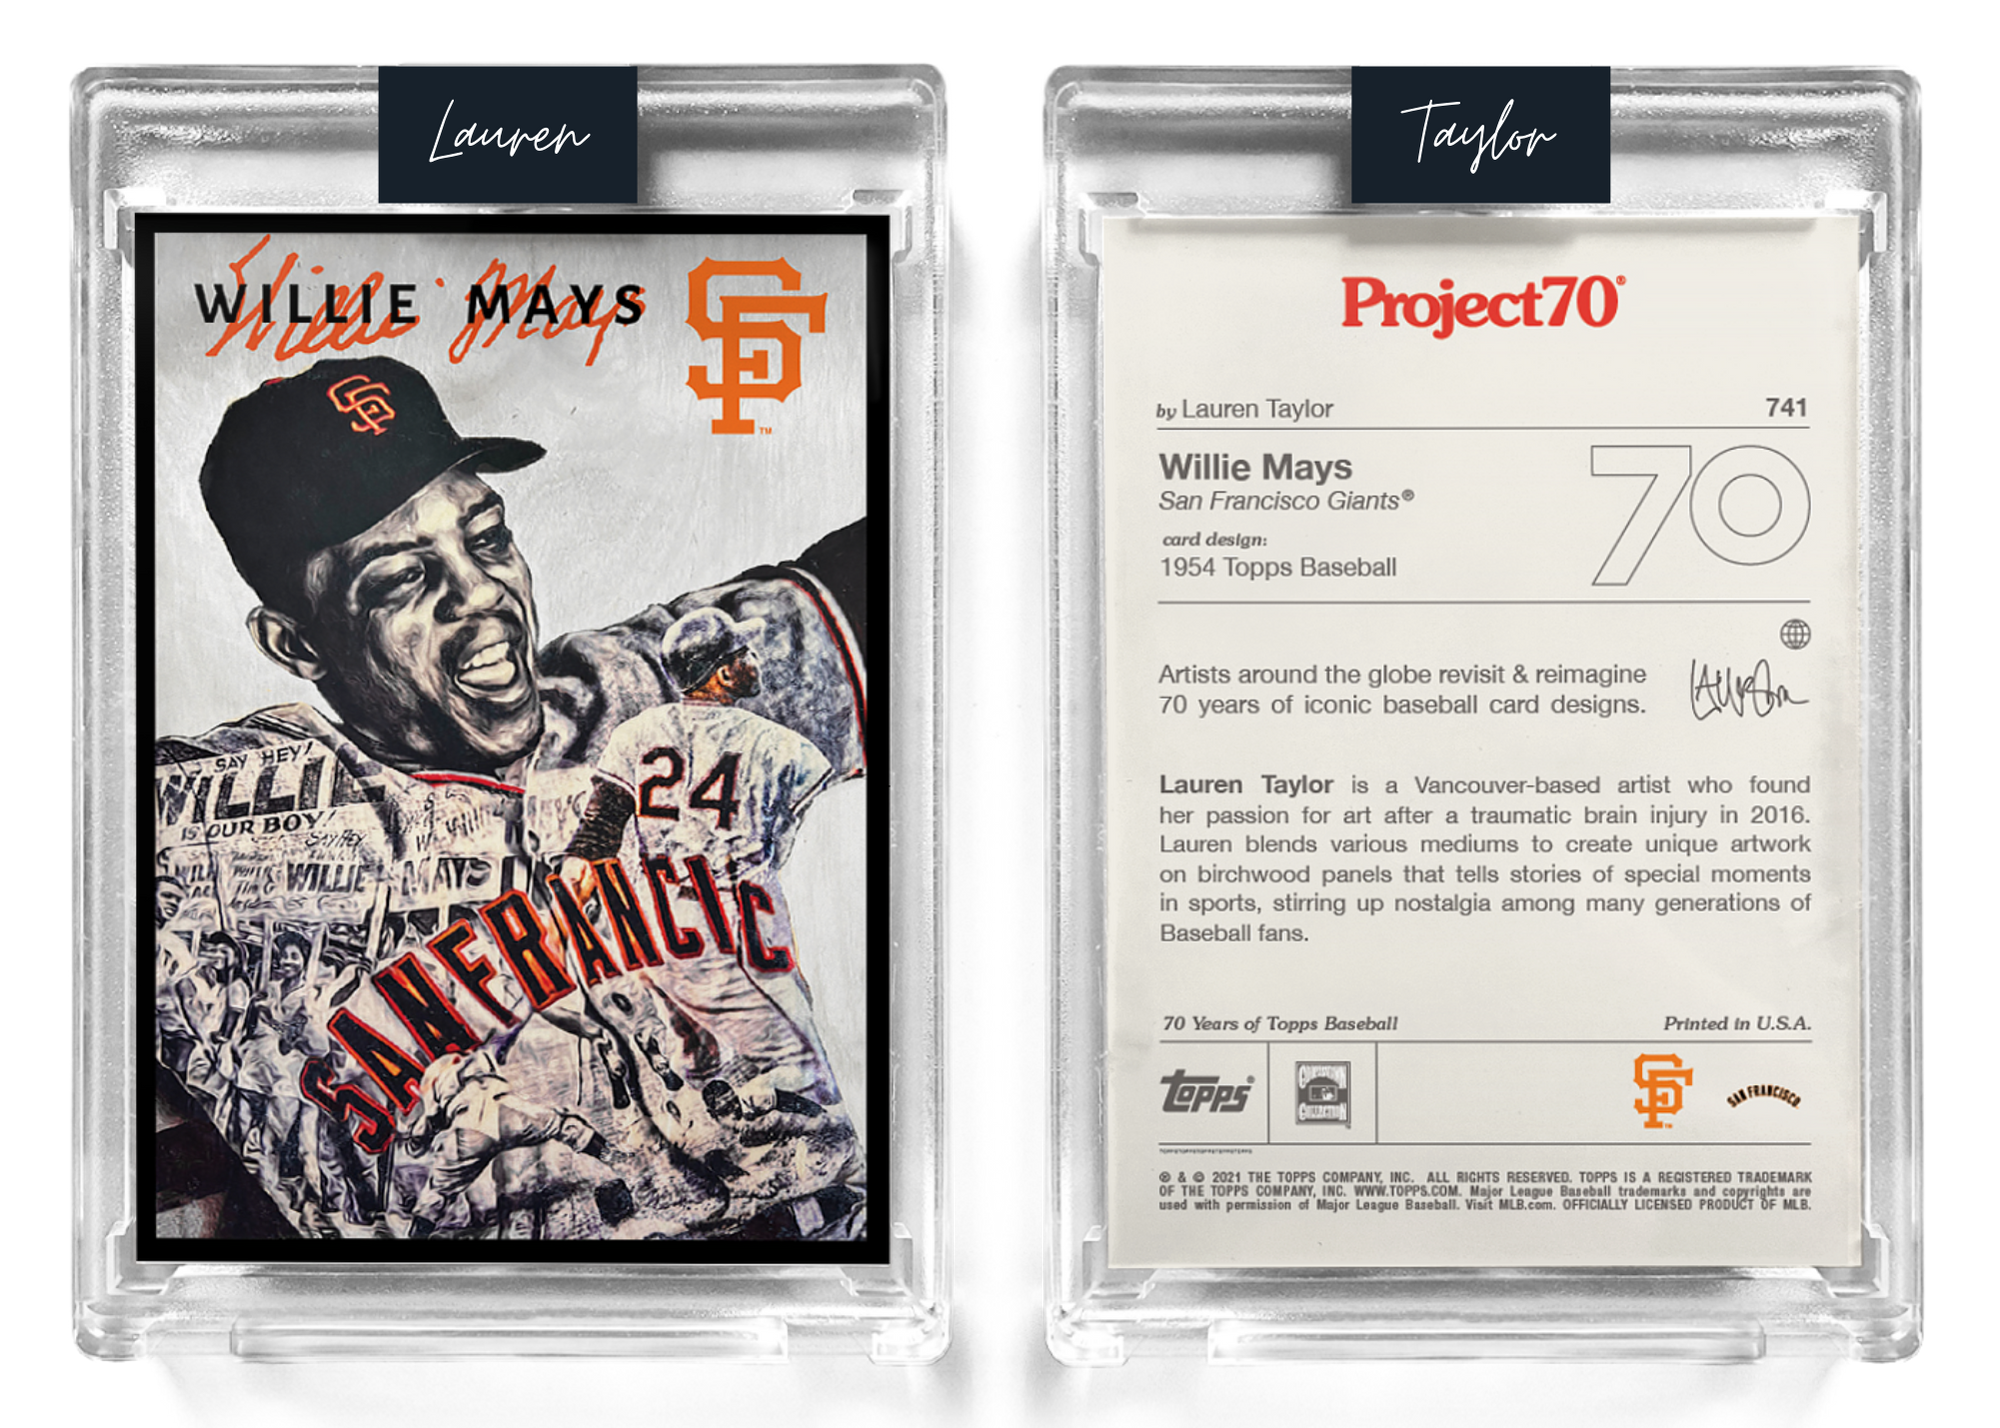 Topps Project 70 Baseball 130pt Card #741 by Lauren Taylor - Willie Mays - Print Run 2773